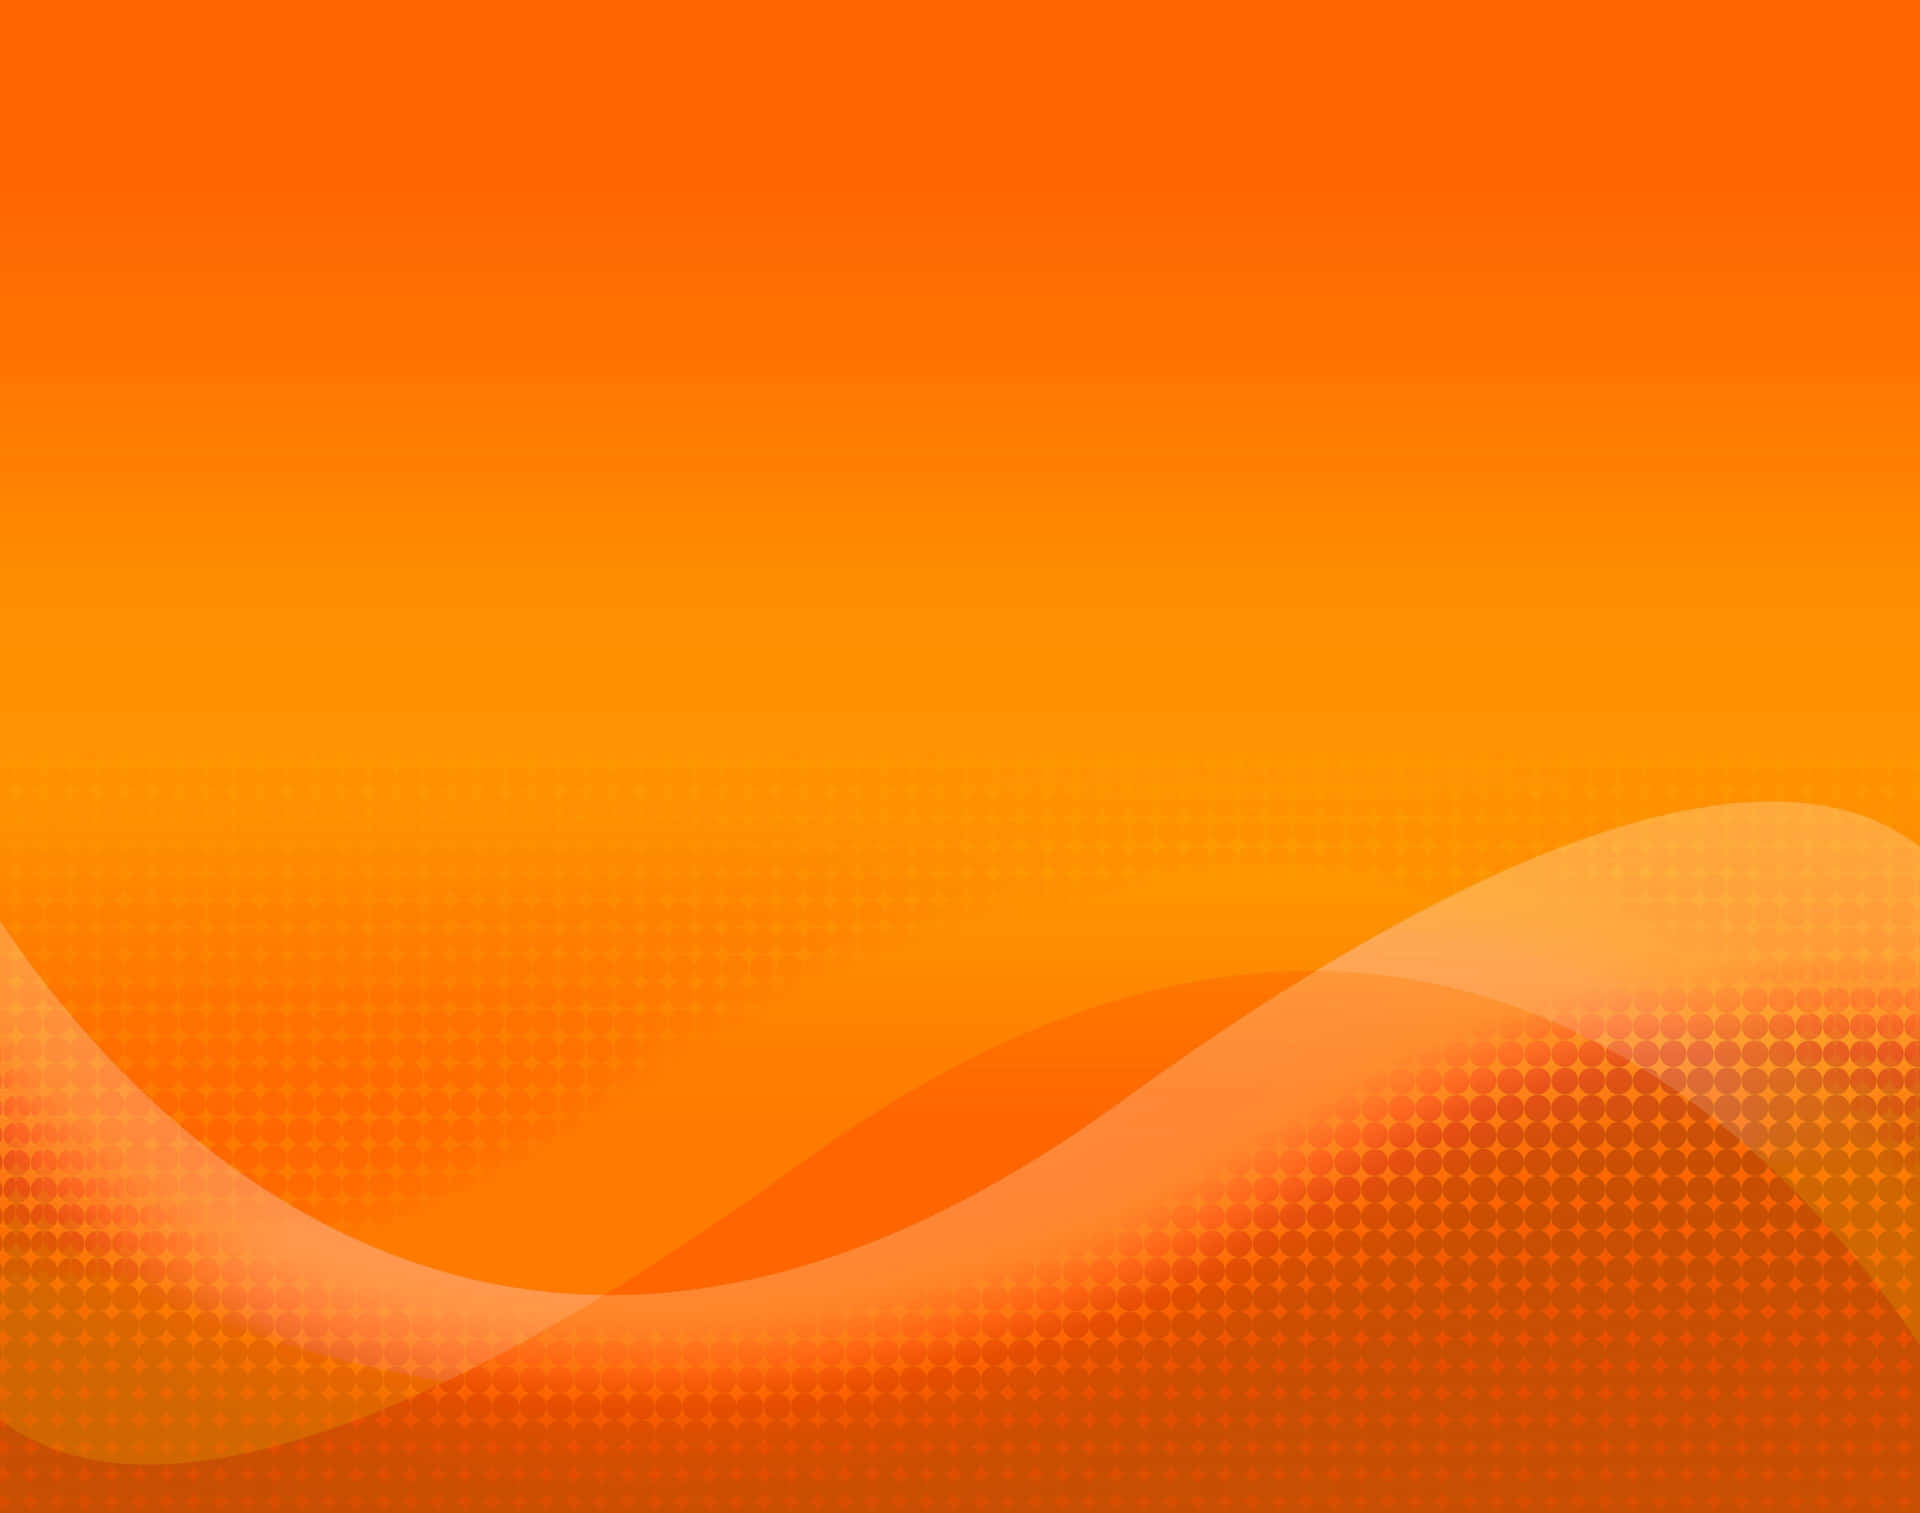 An Orange Background With A Wave Pattern